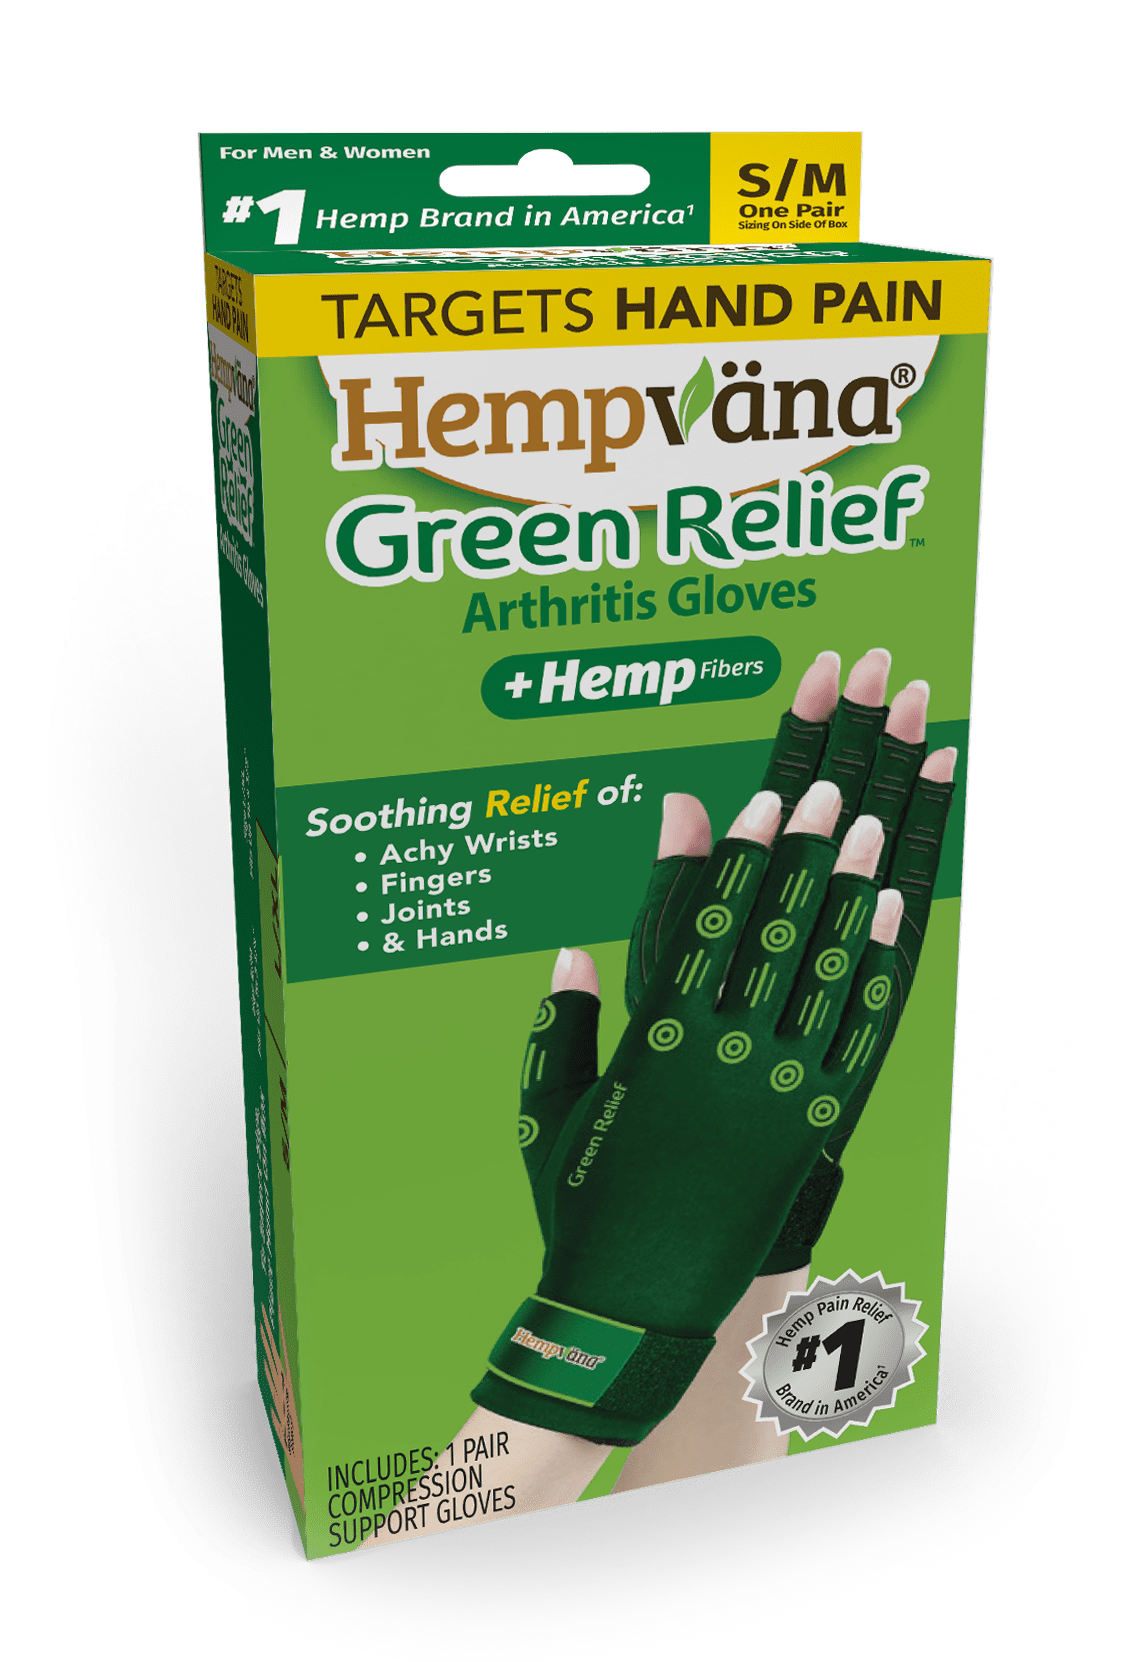 Hempvana Green Relief Arthritis Gloves Woven with Hemp Fibers, As Seen On TV, Advanced Compression to Help Relieve Pain & Swelling, Adjustable Wrist Strap for the Ultimate Fit, Non-Slip Grip, S/M